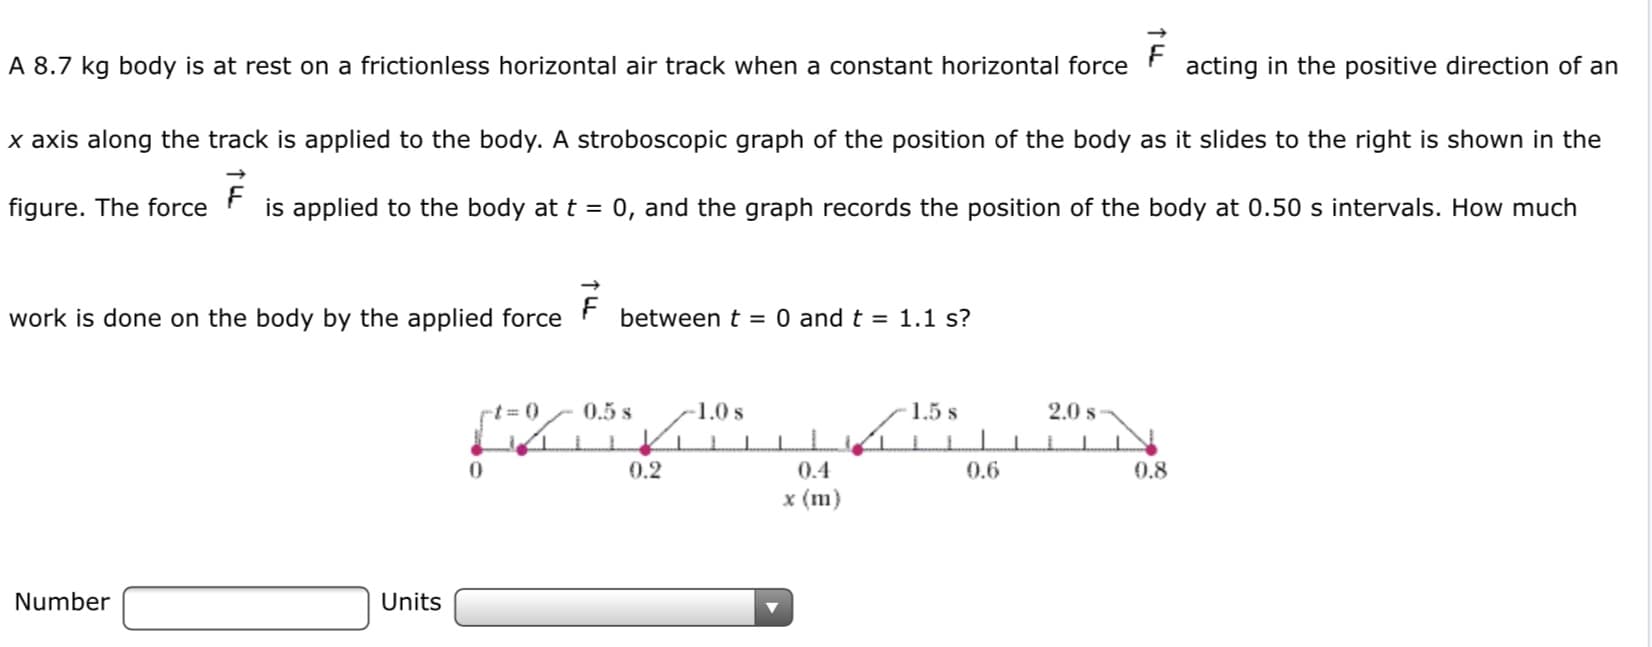 A 8.7 kg body is at rest on a frictionless horizontal air track when a constant horizontal force
acting in the positive direction of an
|x axis along the track is applied to the body. A stroboscopic graph of the position of the body as it slides to the right is shown in the
figure. The force
is applied to the body at t = 0, and the graph records the position of the body at 0.50 s intervals. How much
work is done on the body by the applied force
between t = 0 and t = 1.1 s?
rt= (0
0.5 s
1.0 s
1.5 s
2.0 s
0.2
0.4
0.6
0.8
x (m)
Number
Units
